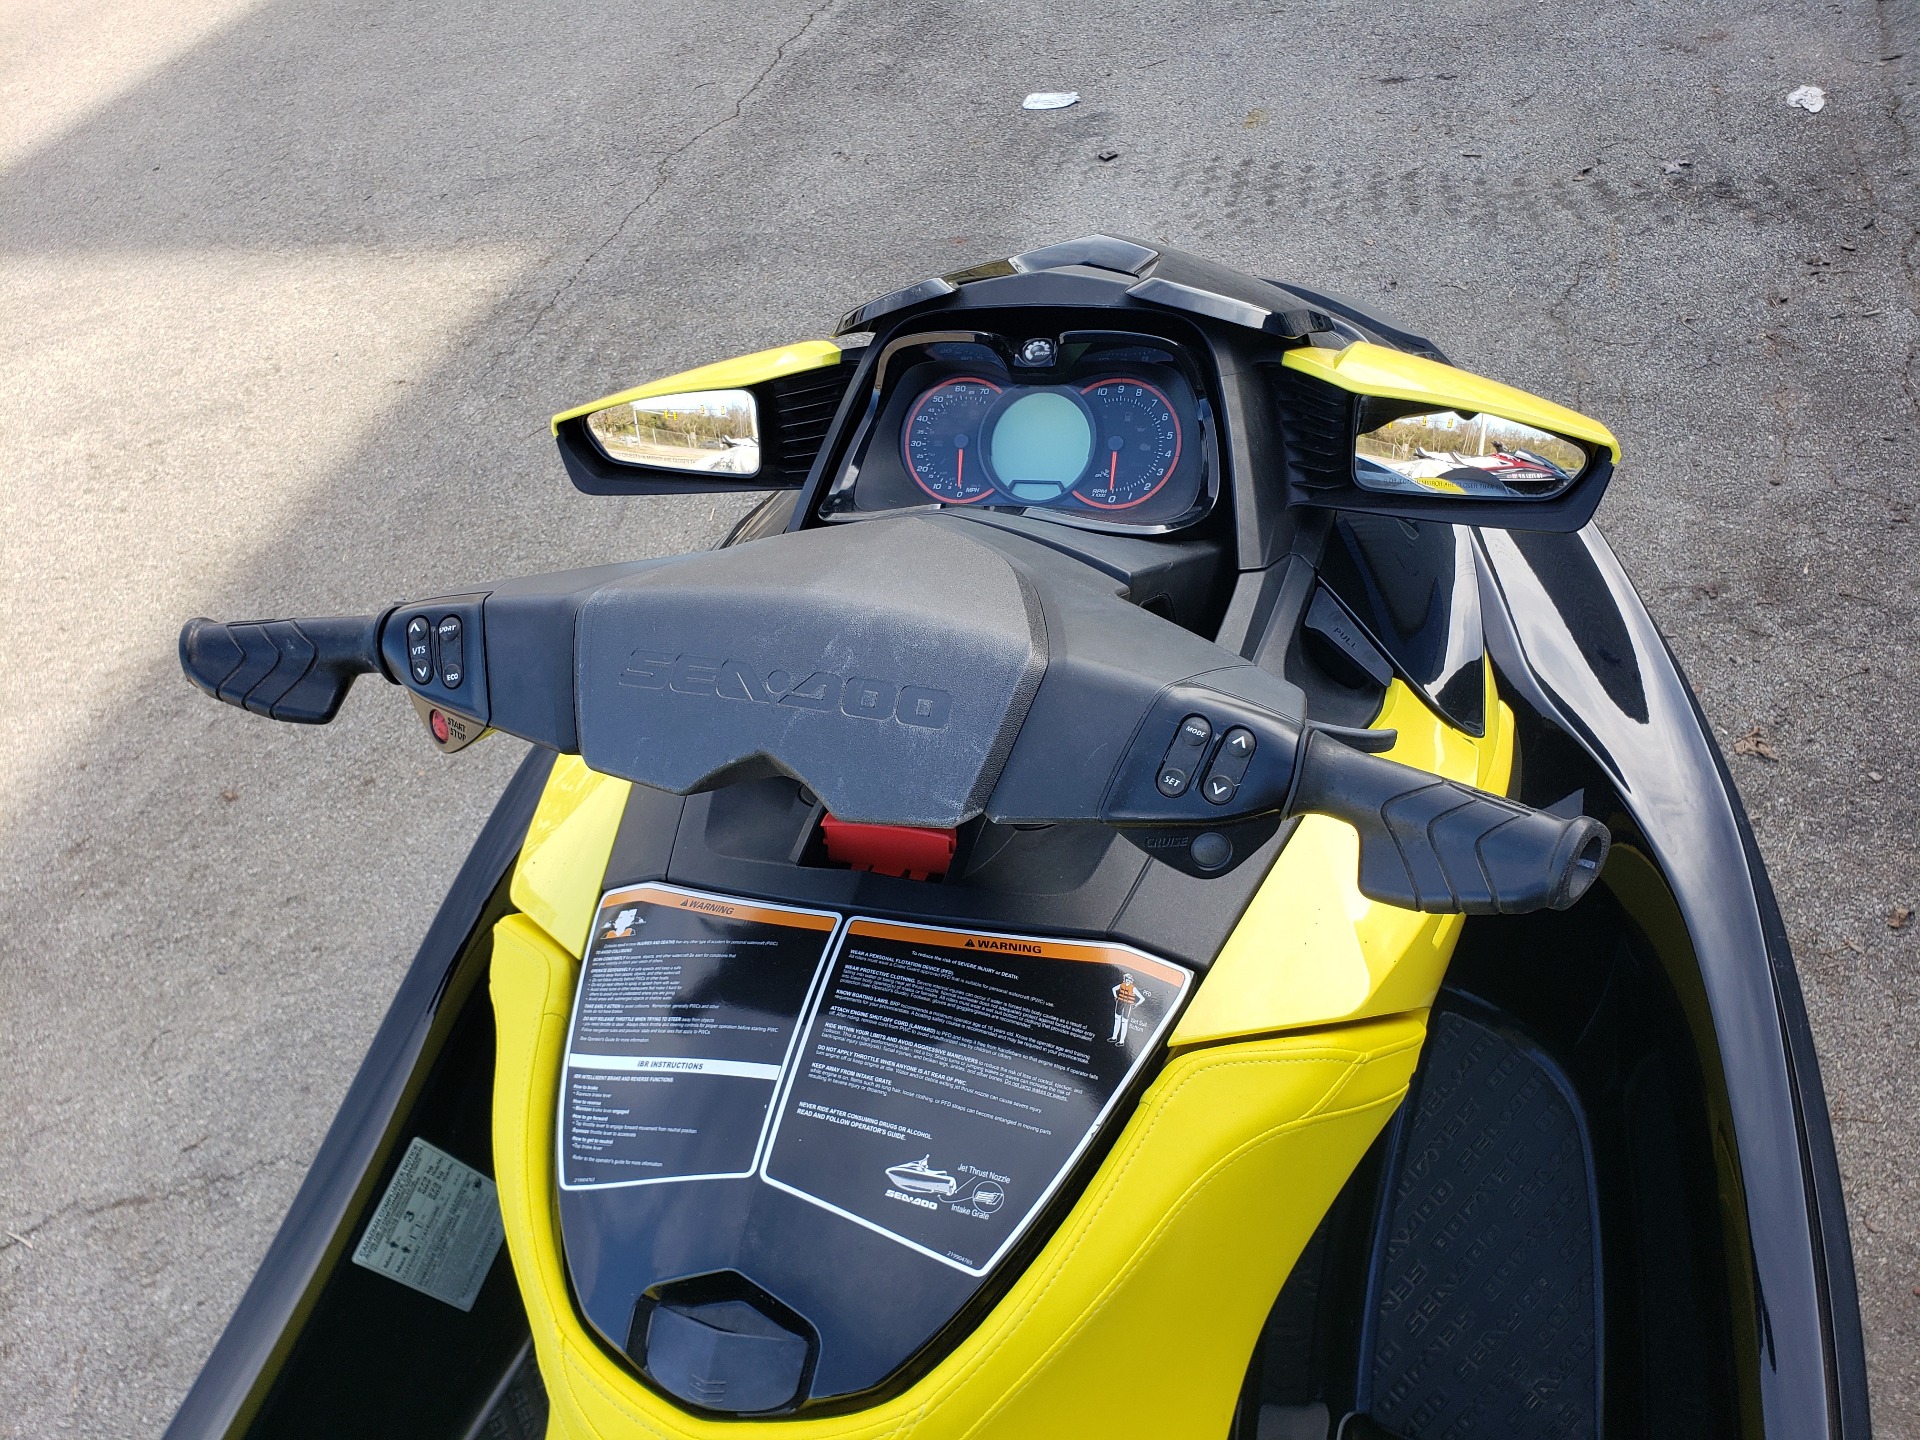 2016 Sea-Doo RXT 260 in Louisville, Tennessee - Photo 7